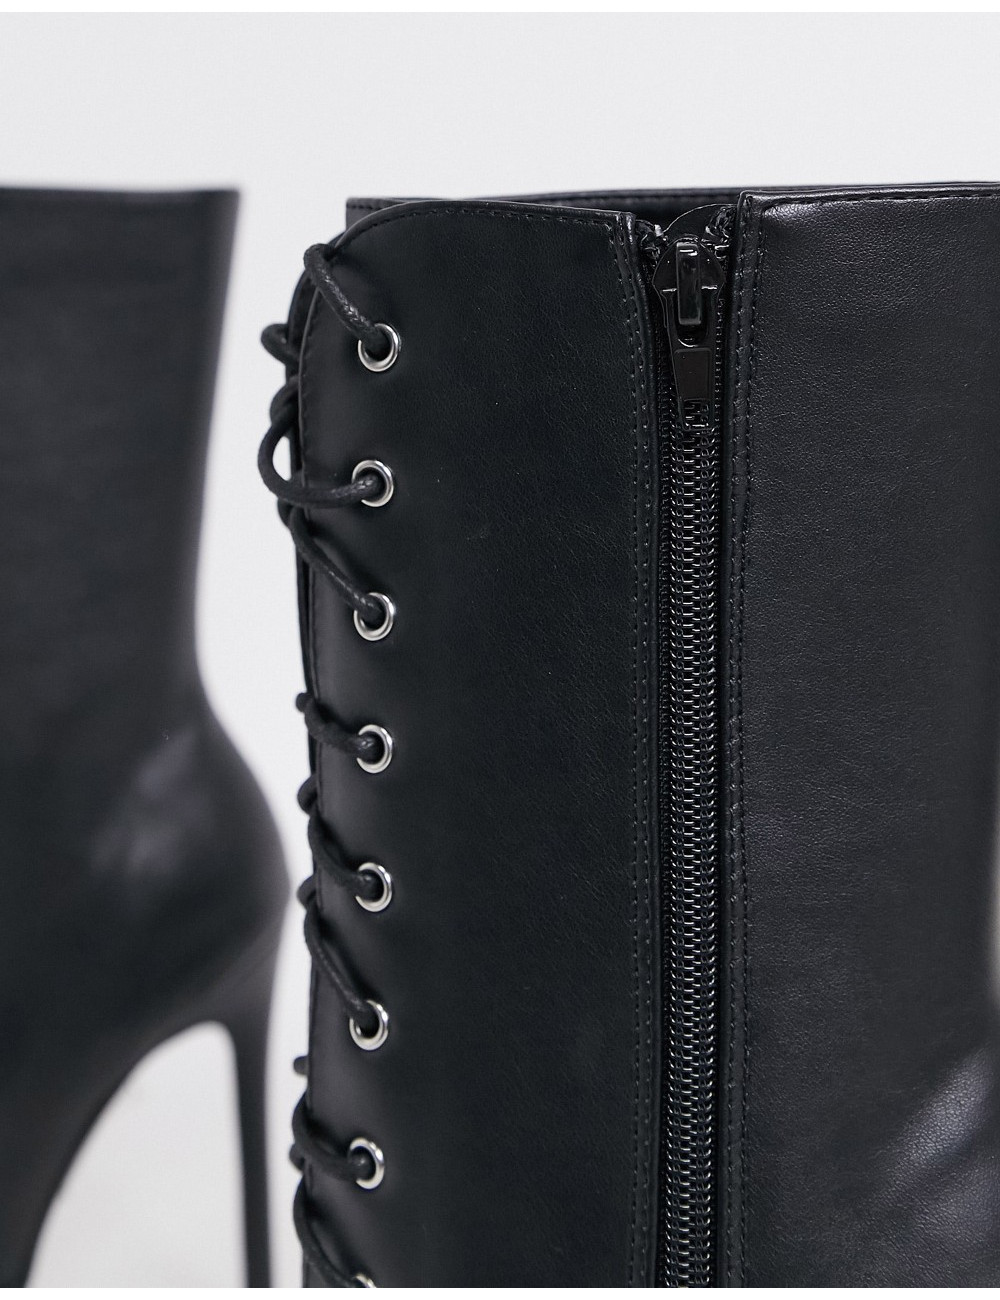 Glamorous lace up boots in...